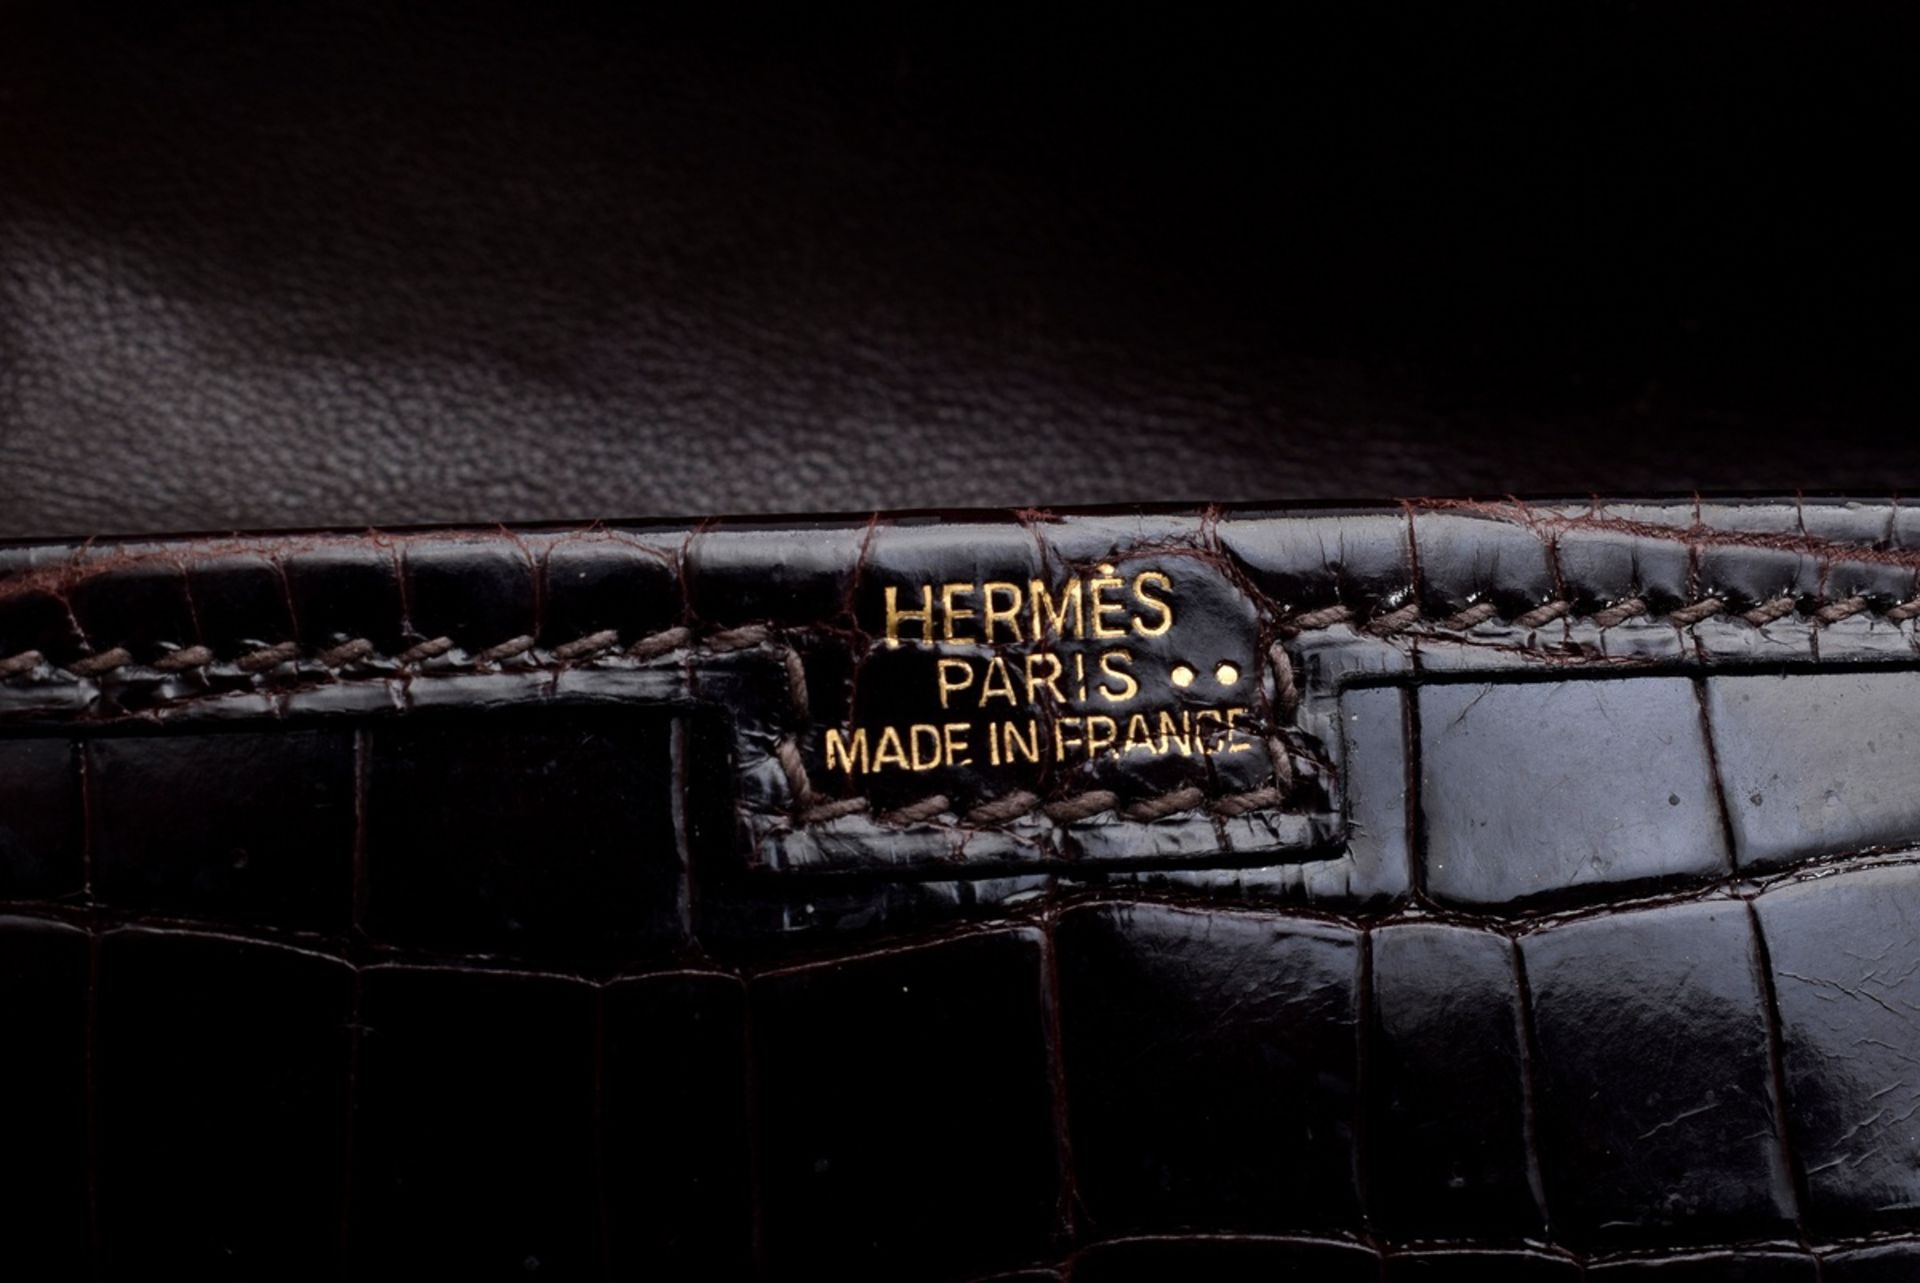 Brown Hermès croco "Jige Clutch" with clasp "H", inscribed: Hermès Paris Made in France", 12.5x19.5 - Image 5 of 5